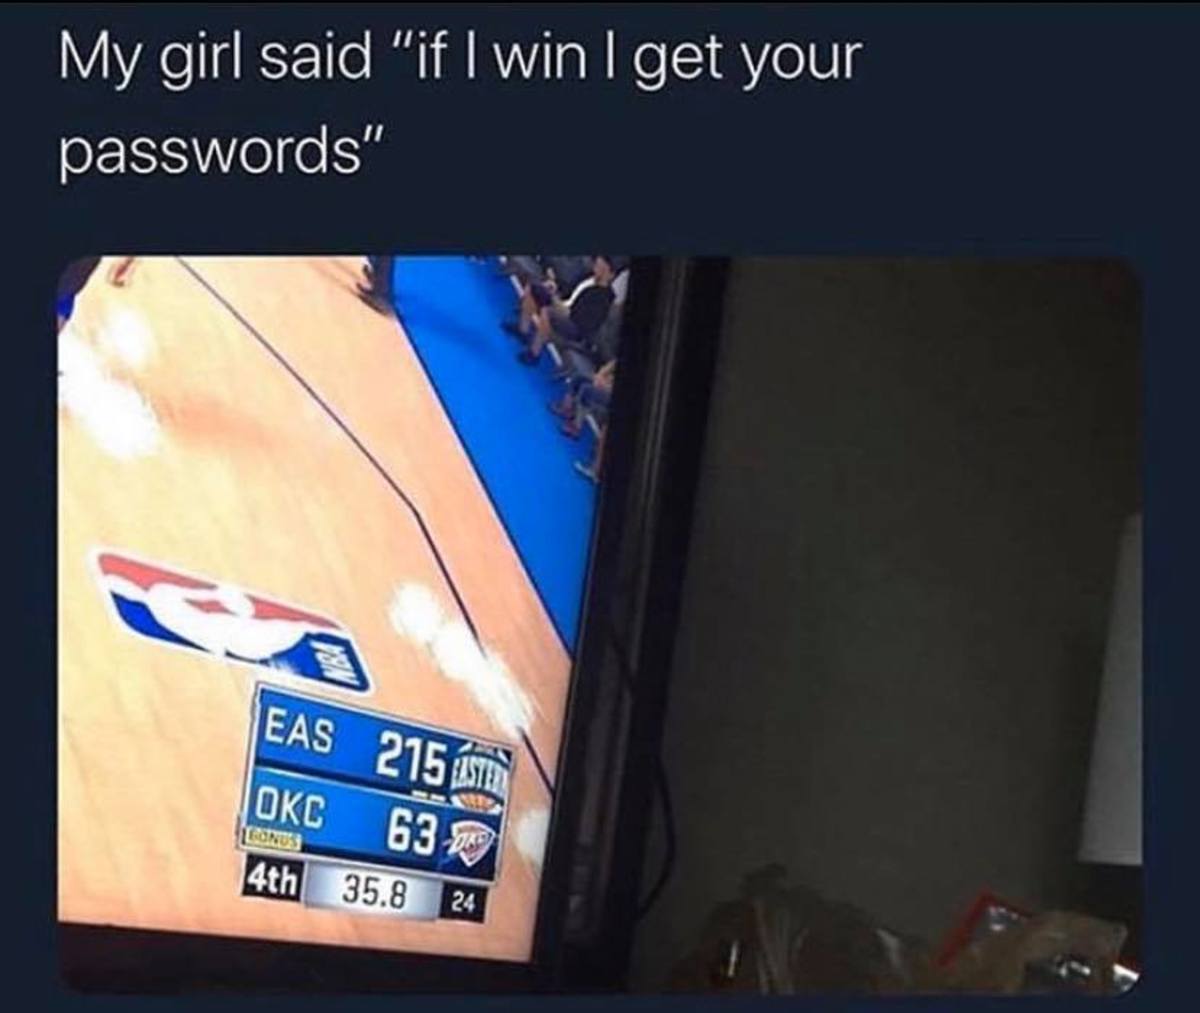 2K Player Destroys Girlfriend's NBA Team After She Asked For His Password If He Lost